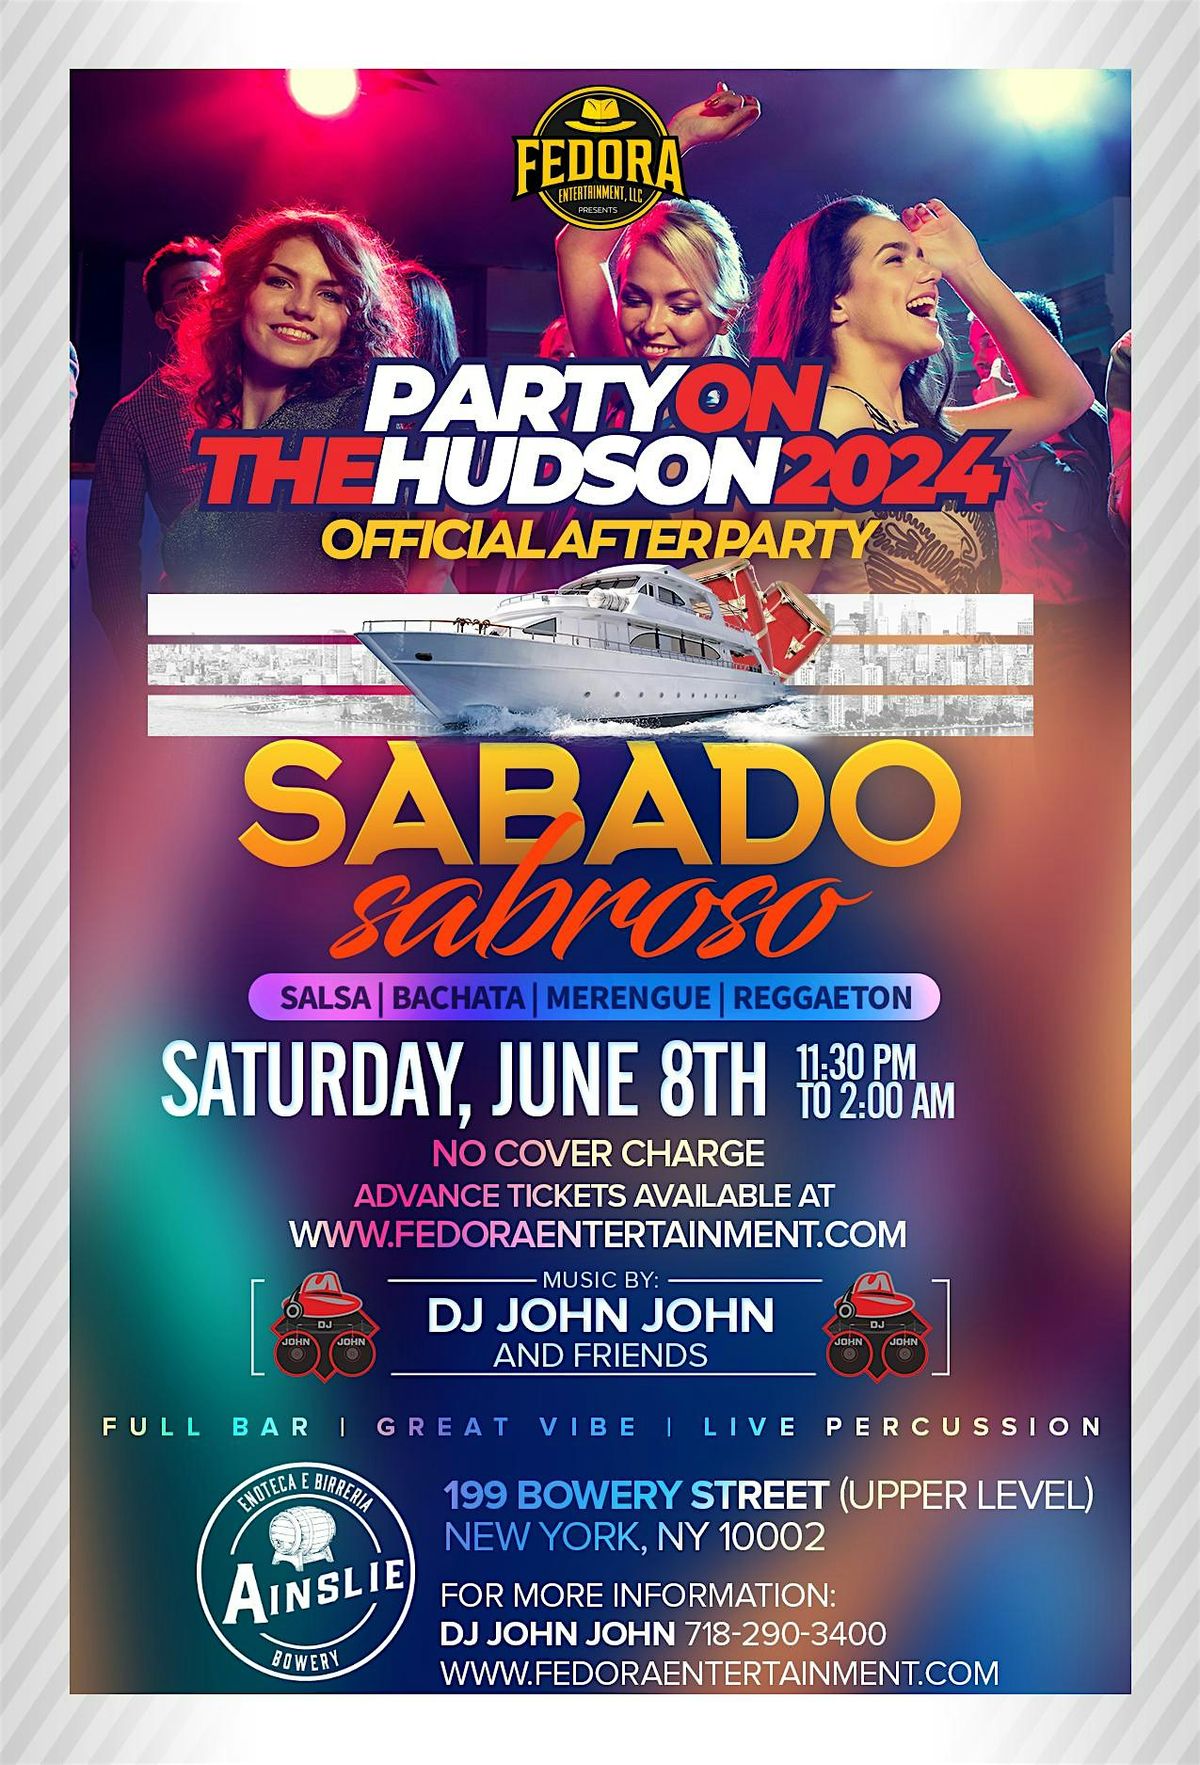 S\u00c1BADO SABROSO | Official After Party of PARTY ON THE HUDSON